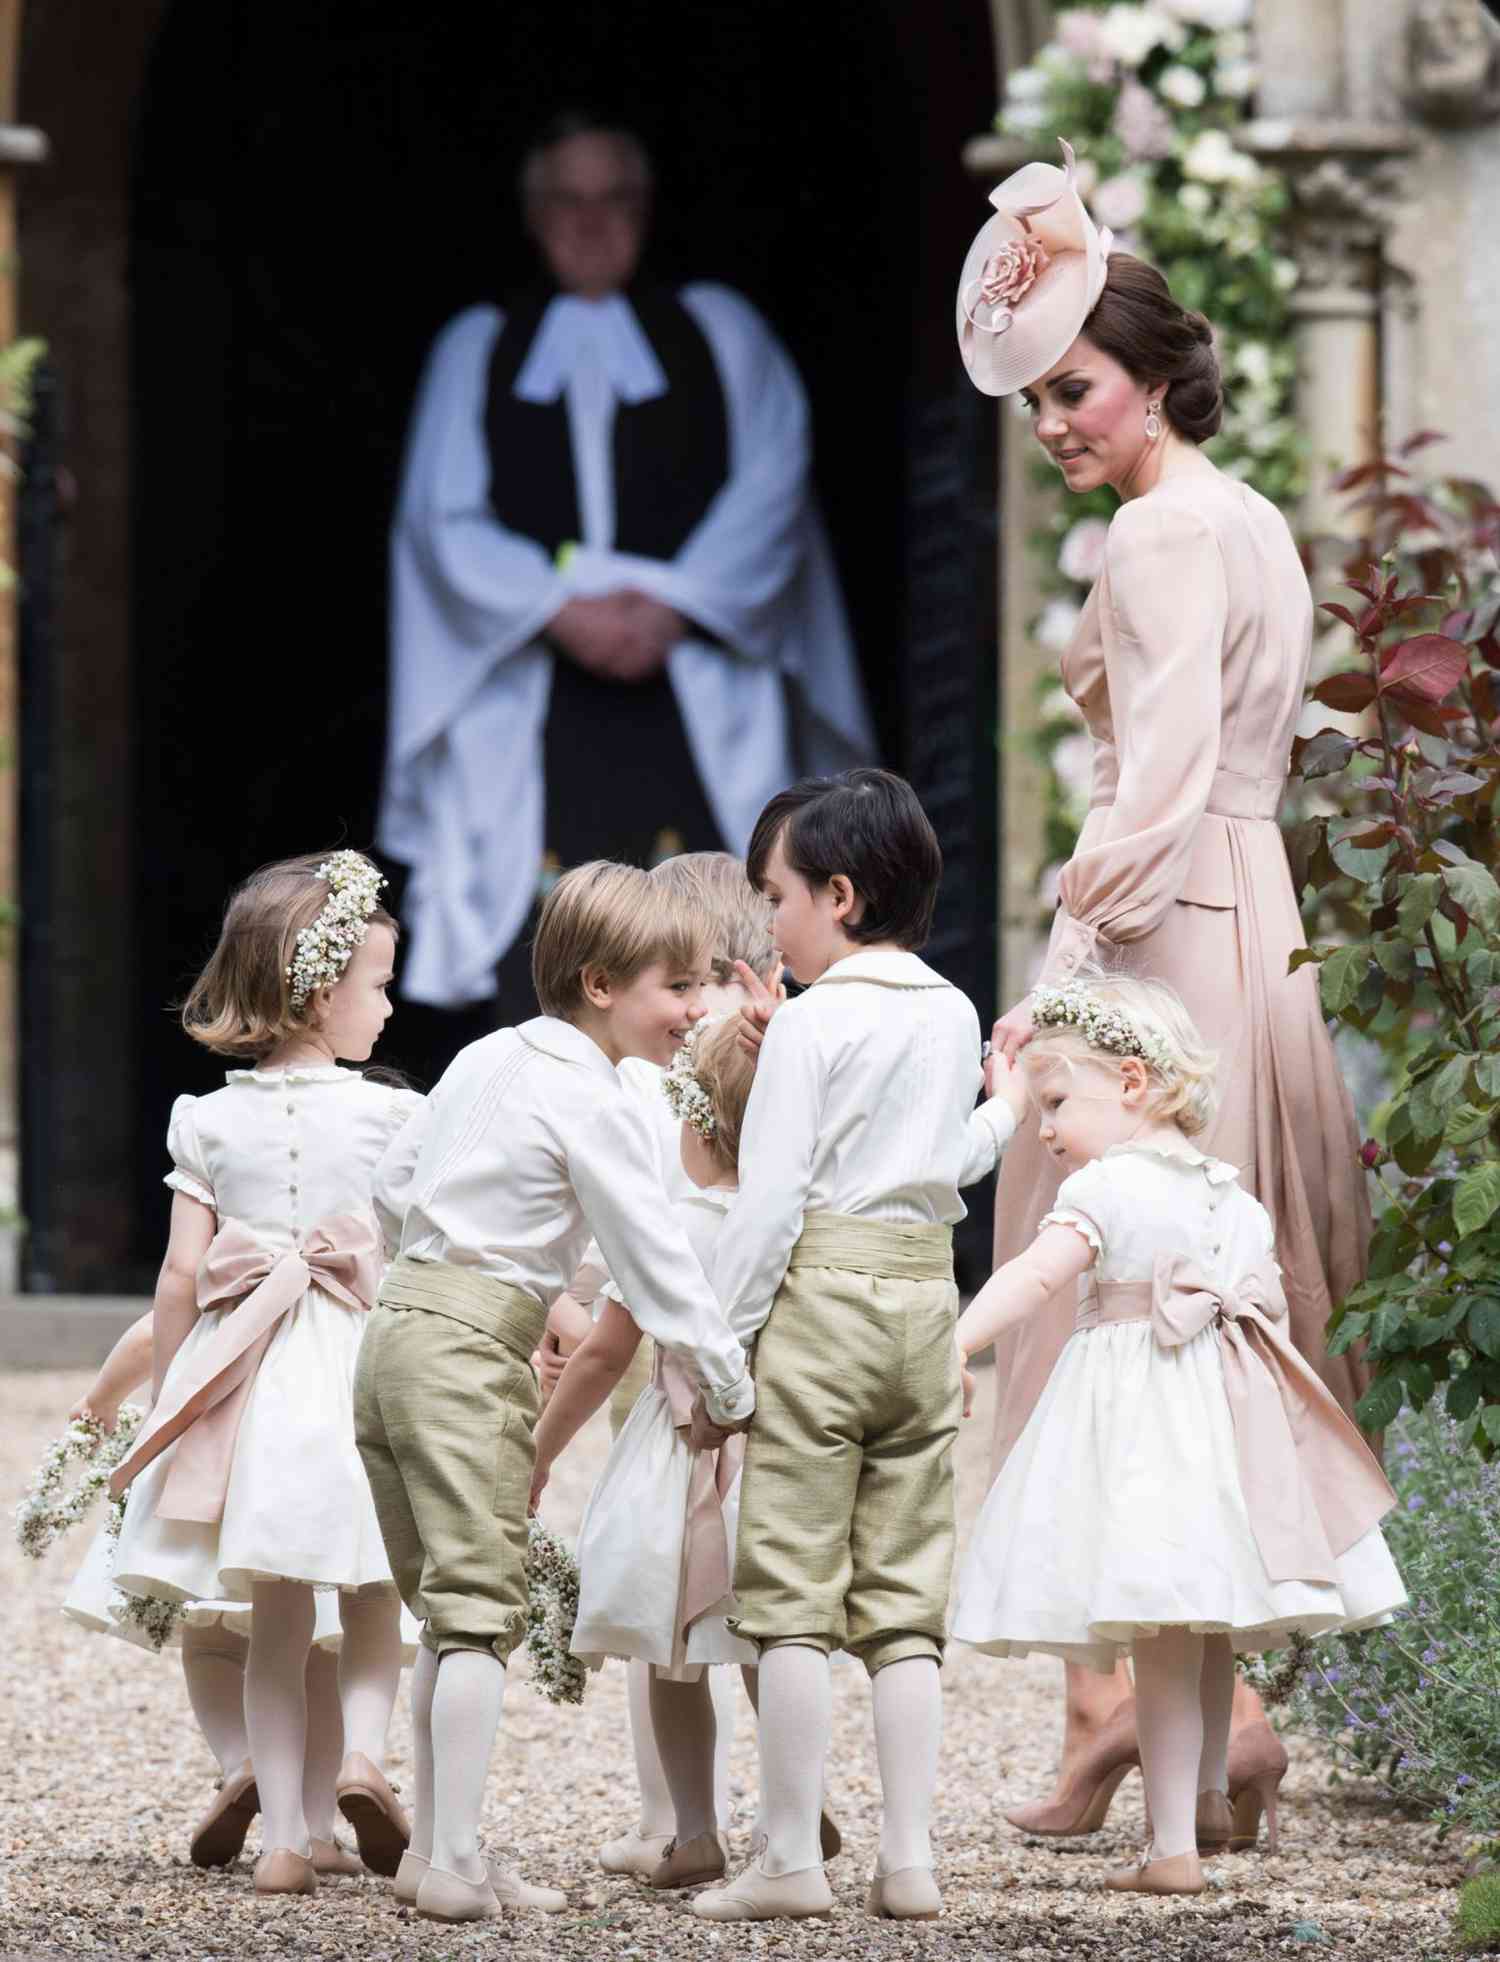 Duchess Kate with Charlotte and George at Pippa Middleton wedding